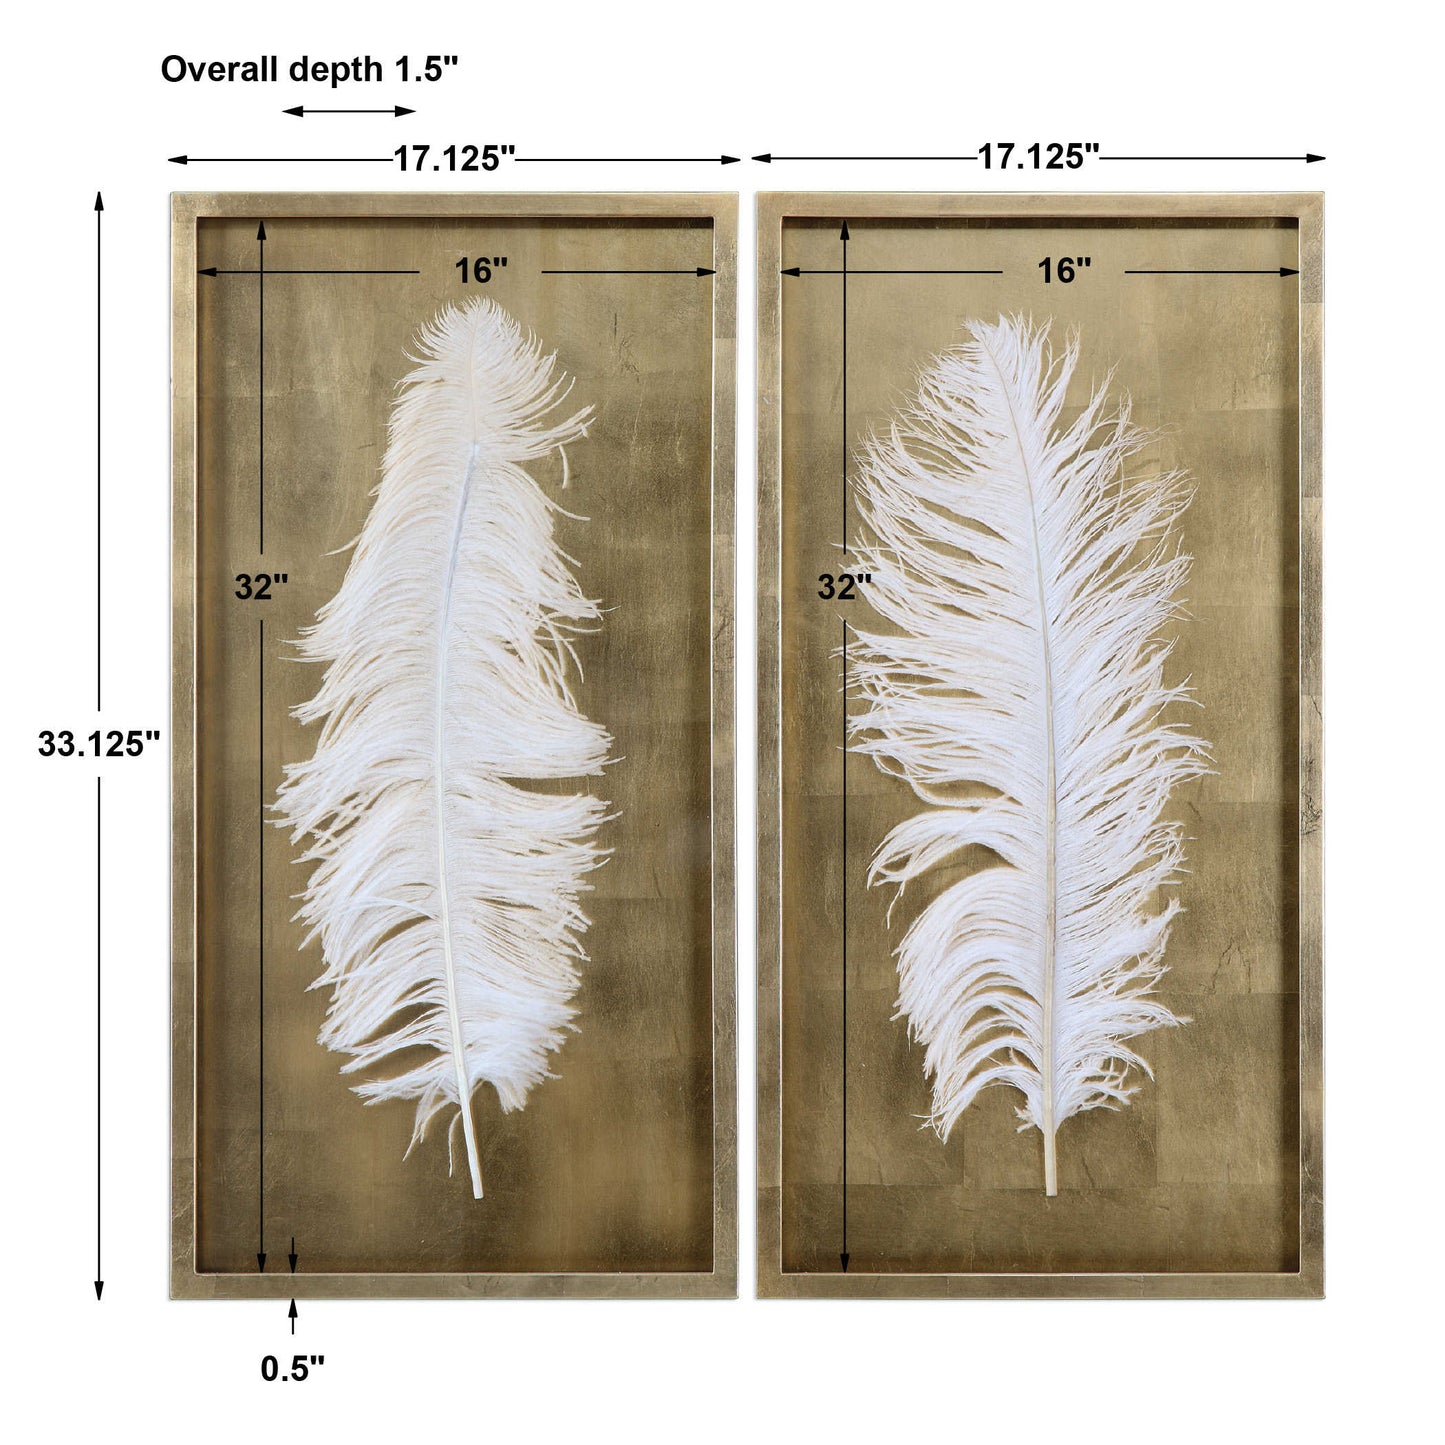 WHITE FEATHERS SHADOW BOXES, S/2